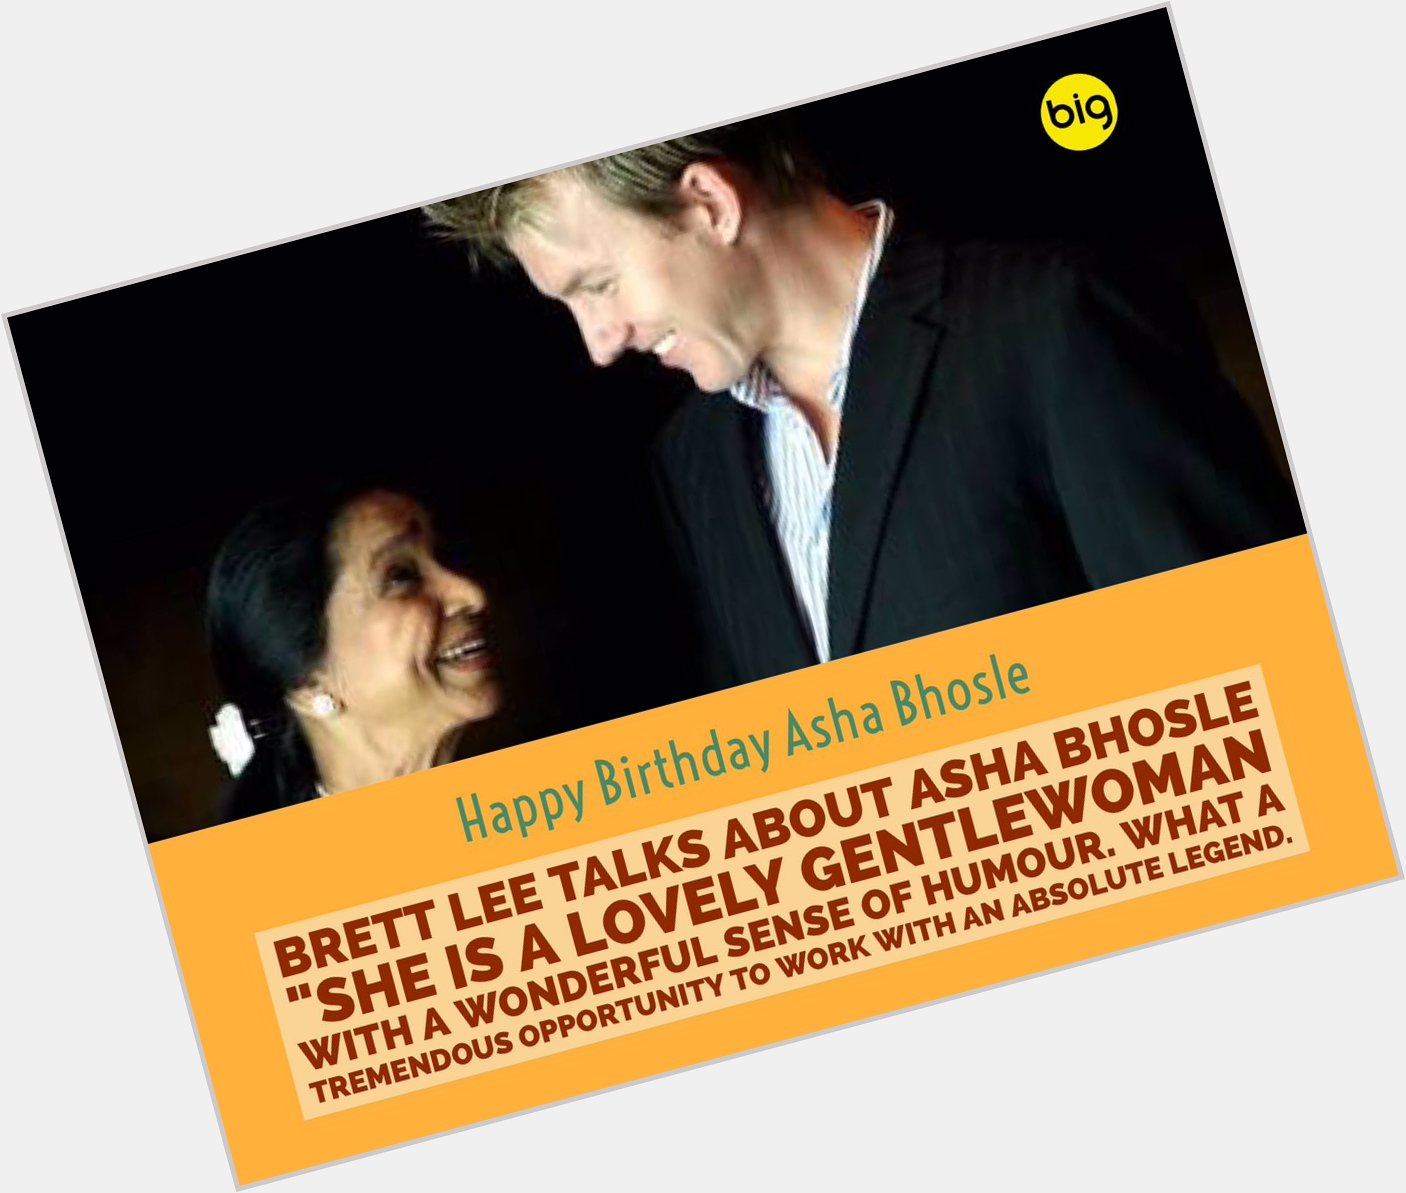 Happy Birthday look what great fast bowler once said about Asha Bhosle 